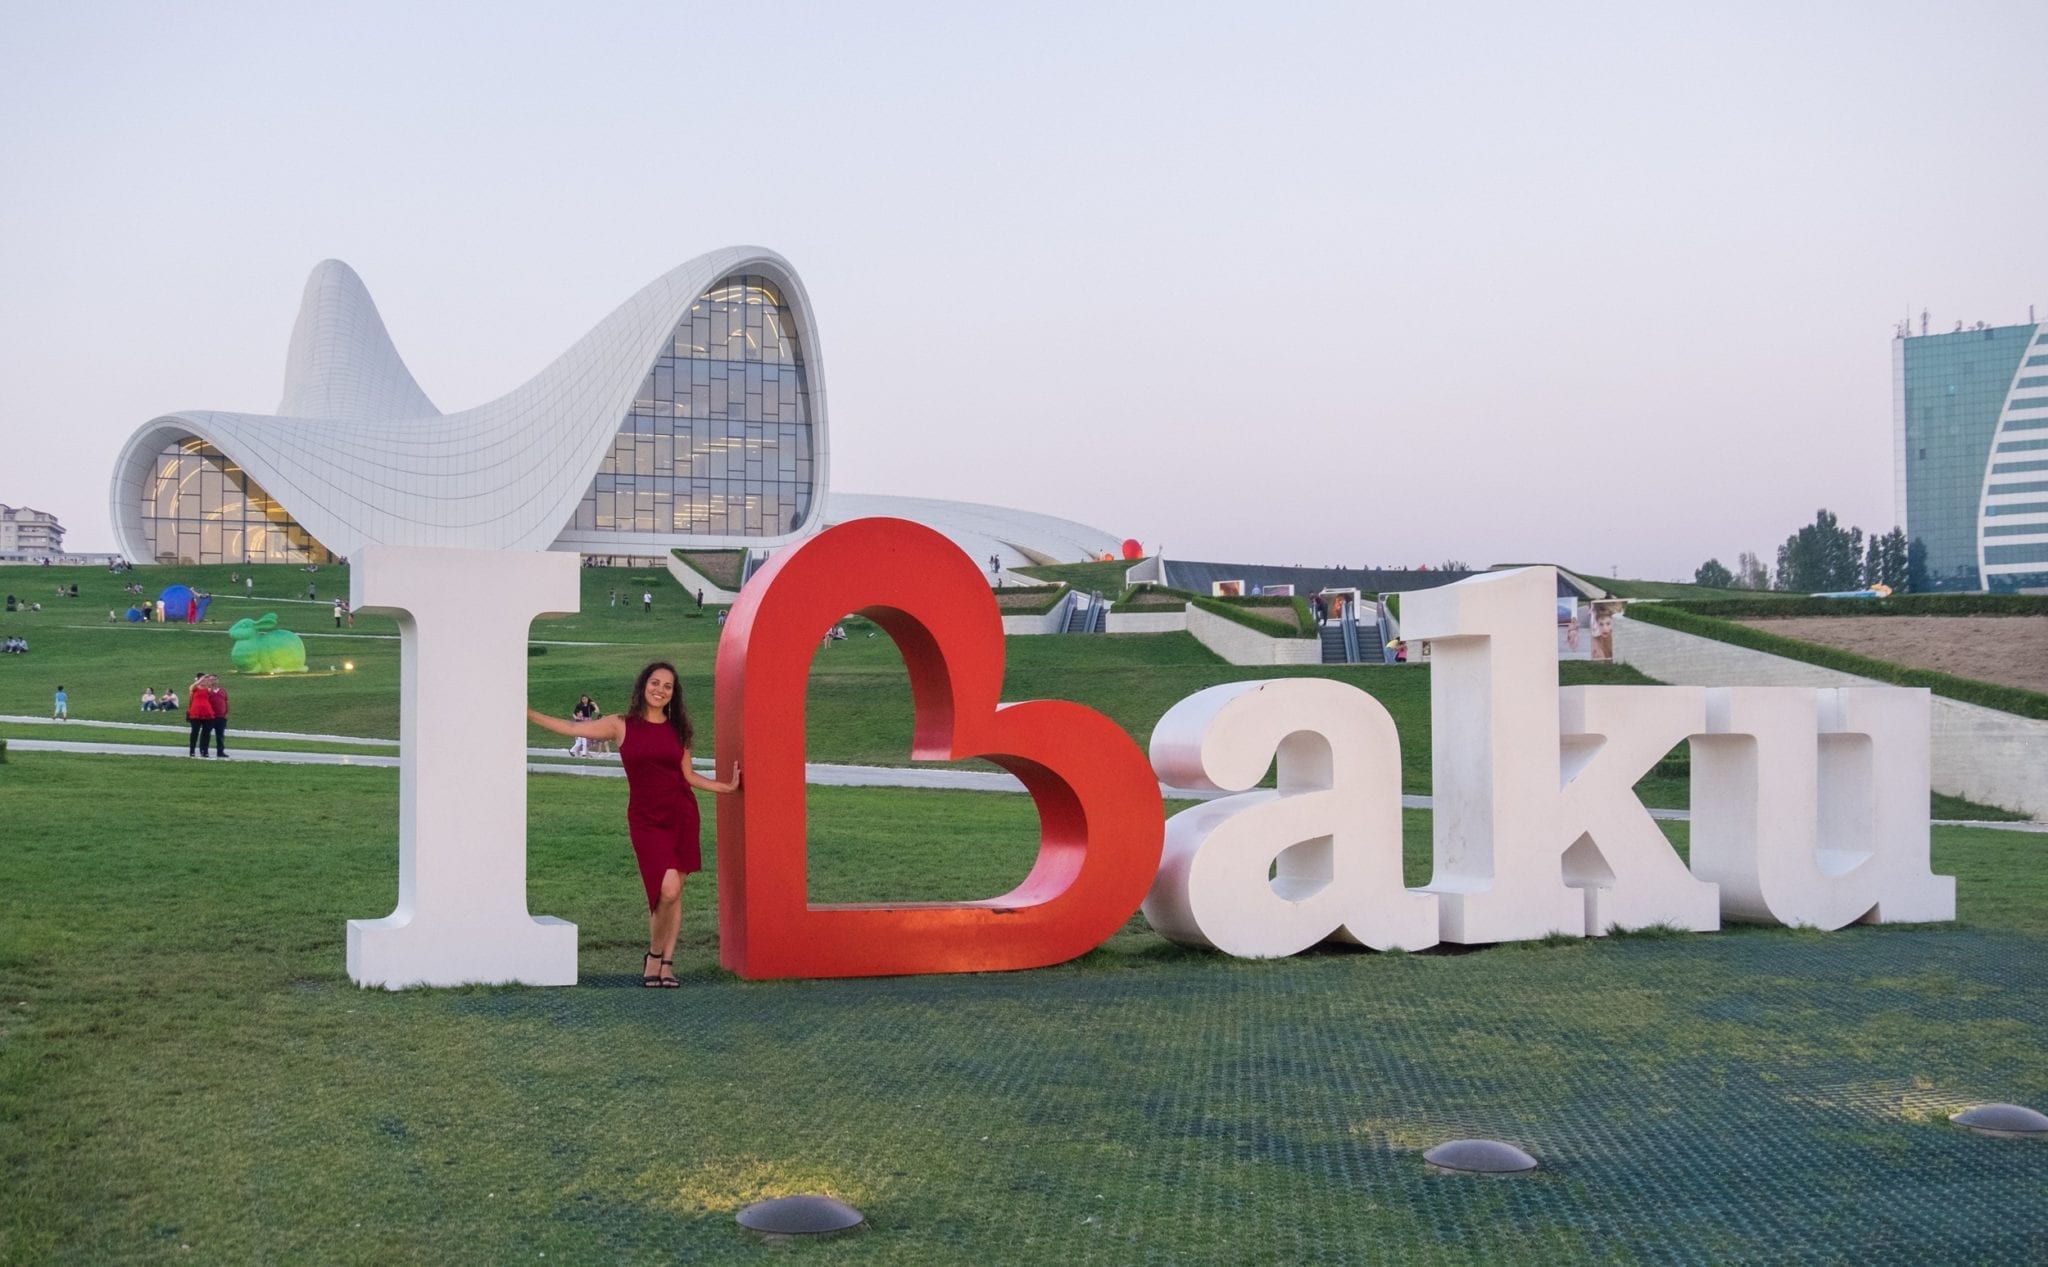 Kate stands in the middle of an "I Love Baku" sign where the B is shaped like a heart. In the background is the swooping white roof of the Heydar Aliyev Center.